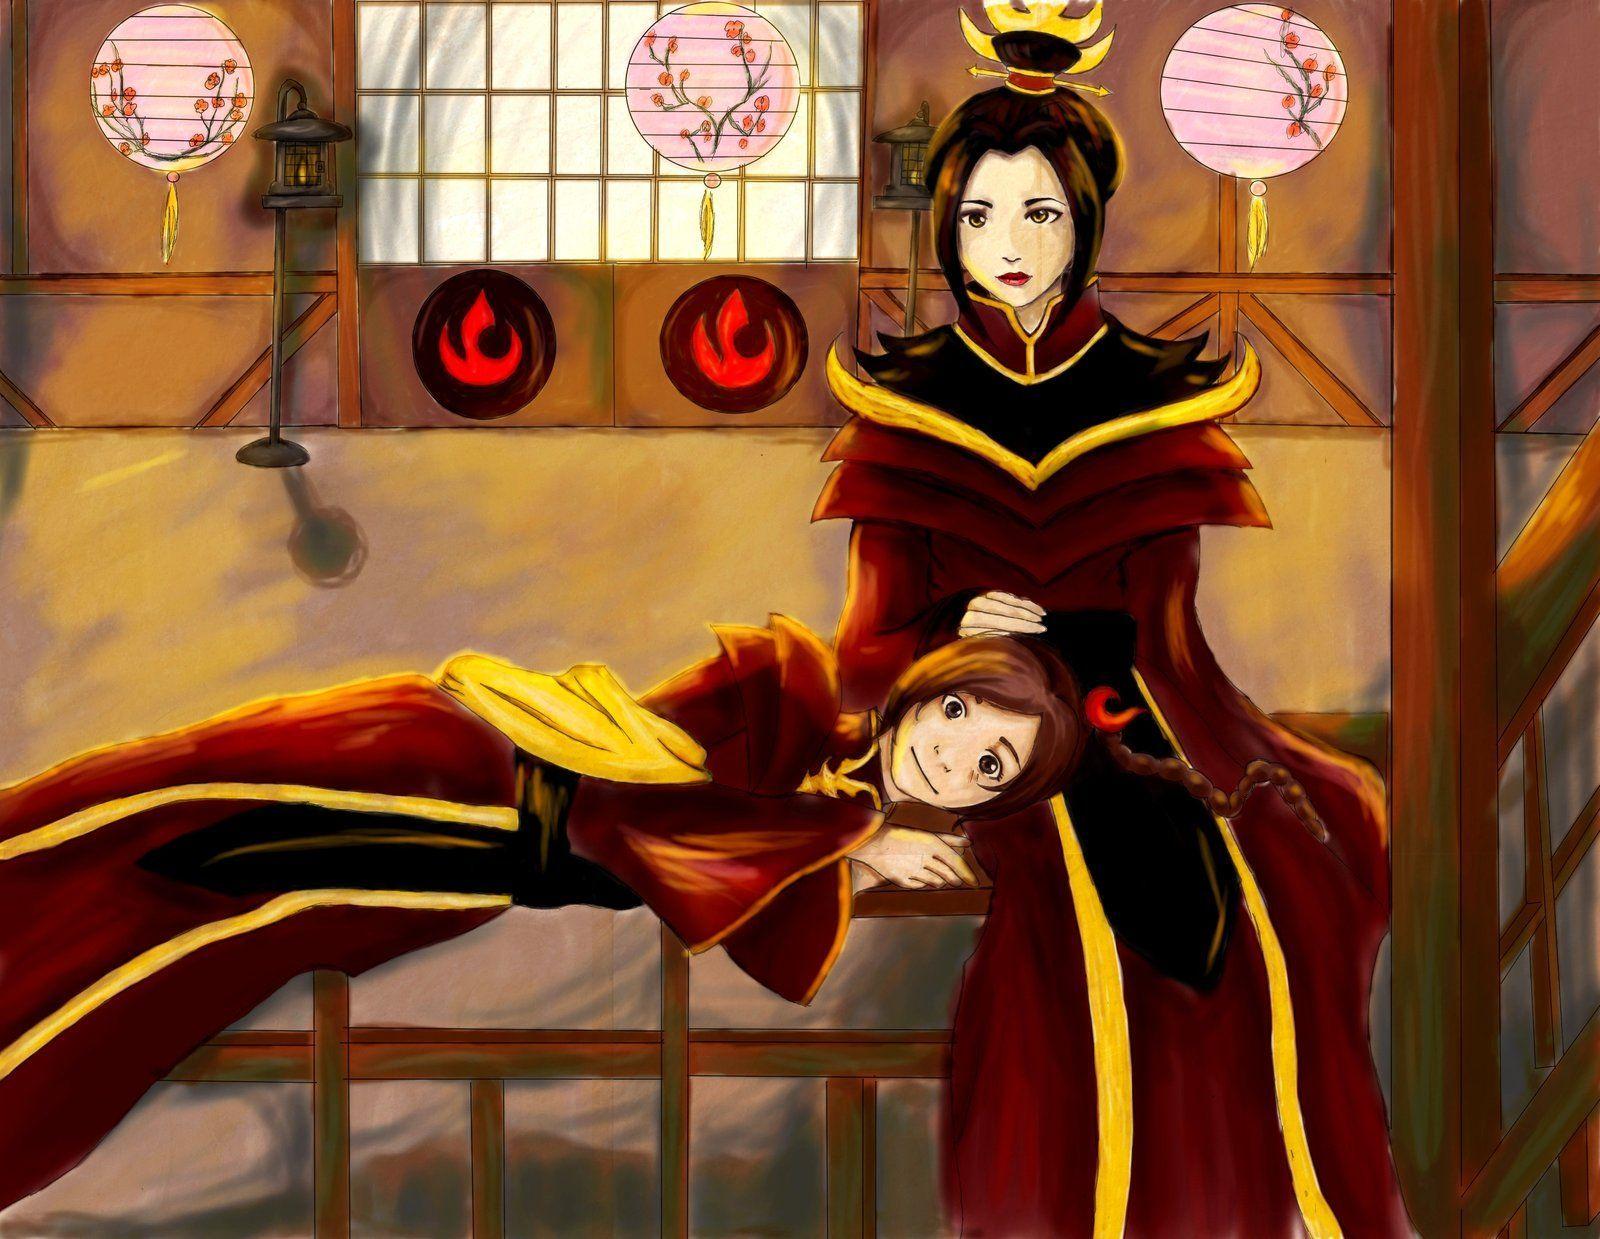 Fire Lord Azula and her Lady Ty Lee. Description from